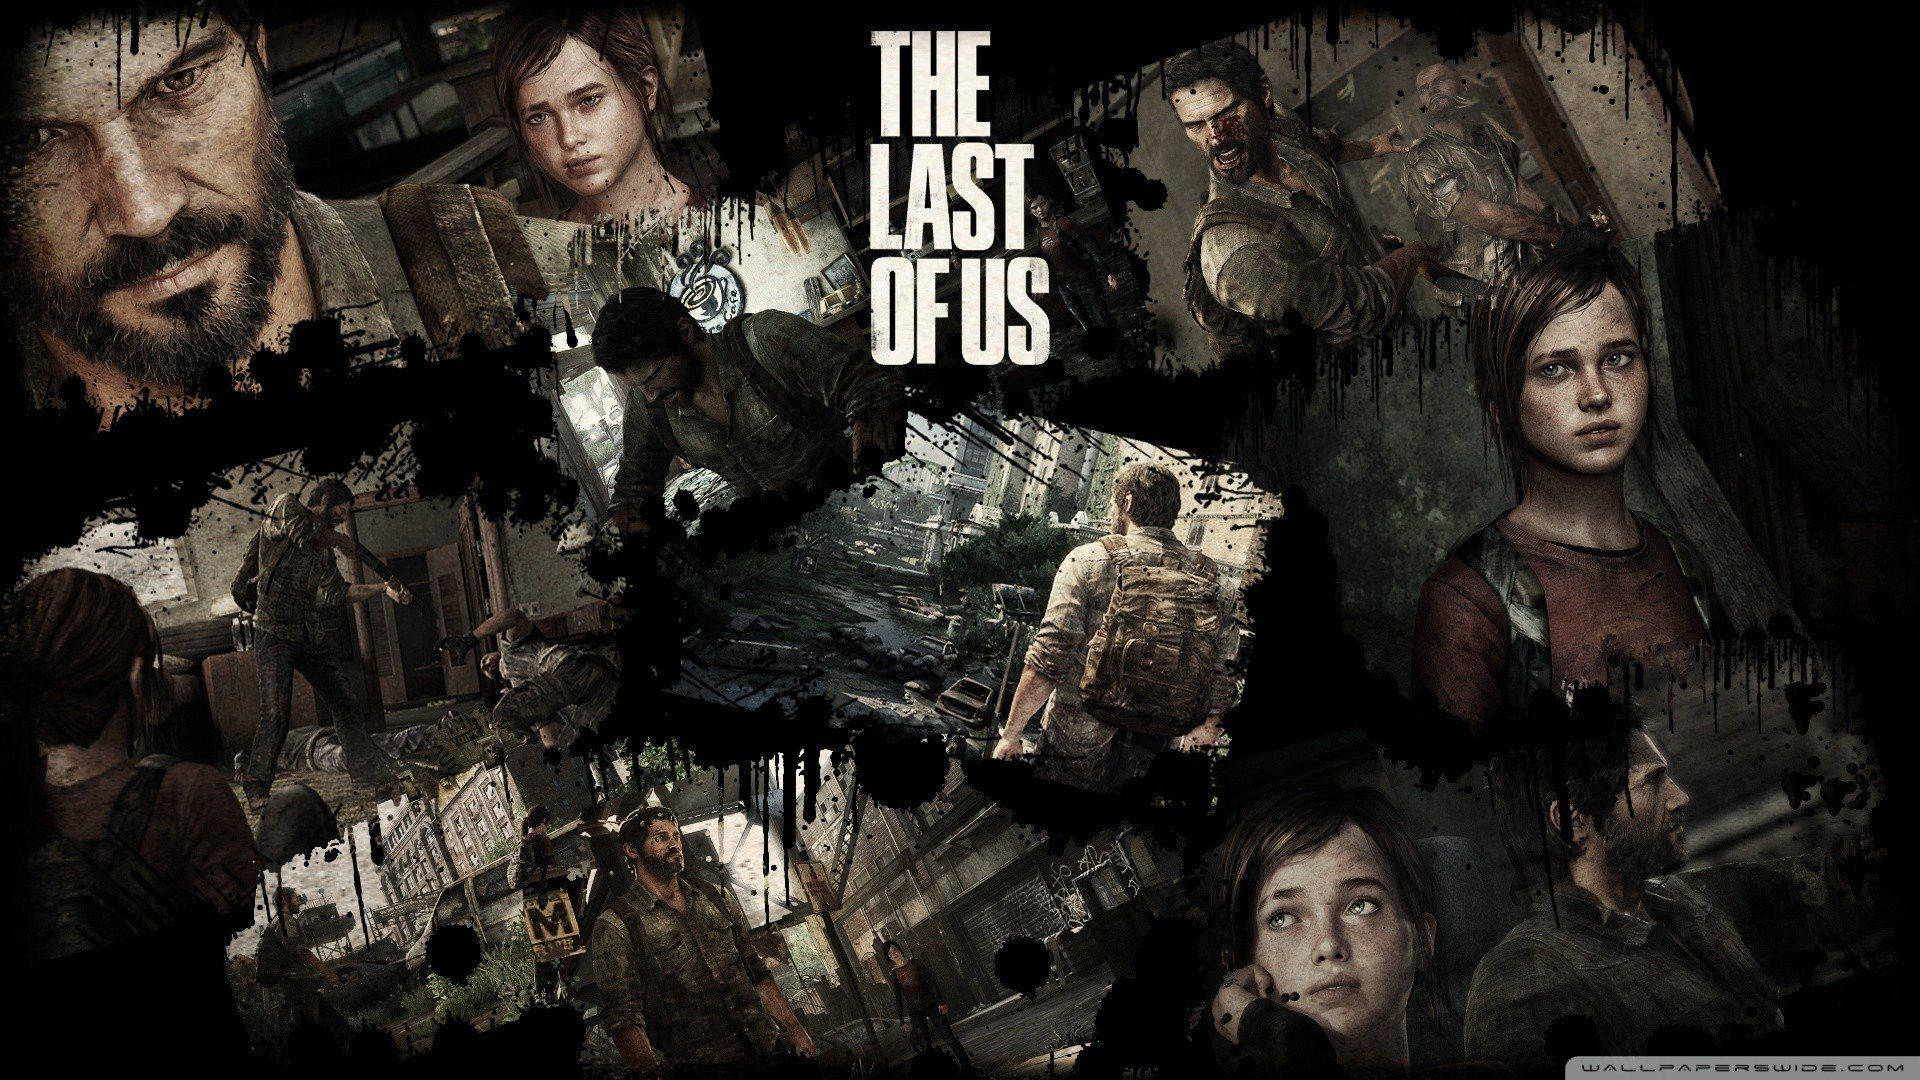 Joel And Ellie Living On The Edge In The Last Of Us Background